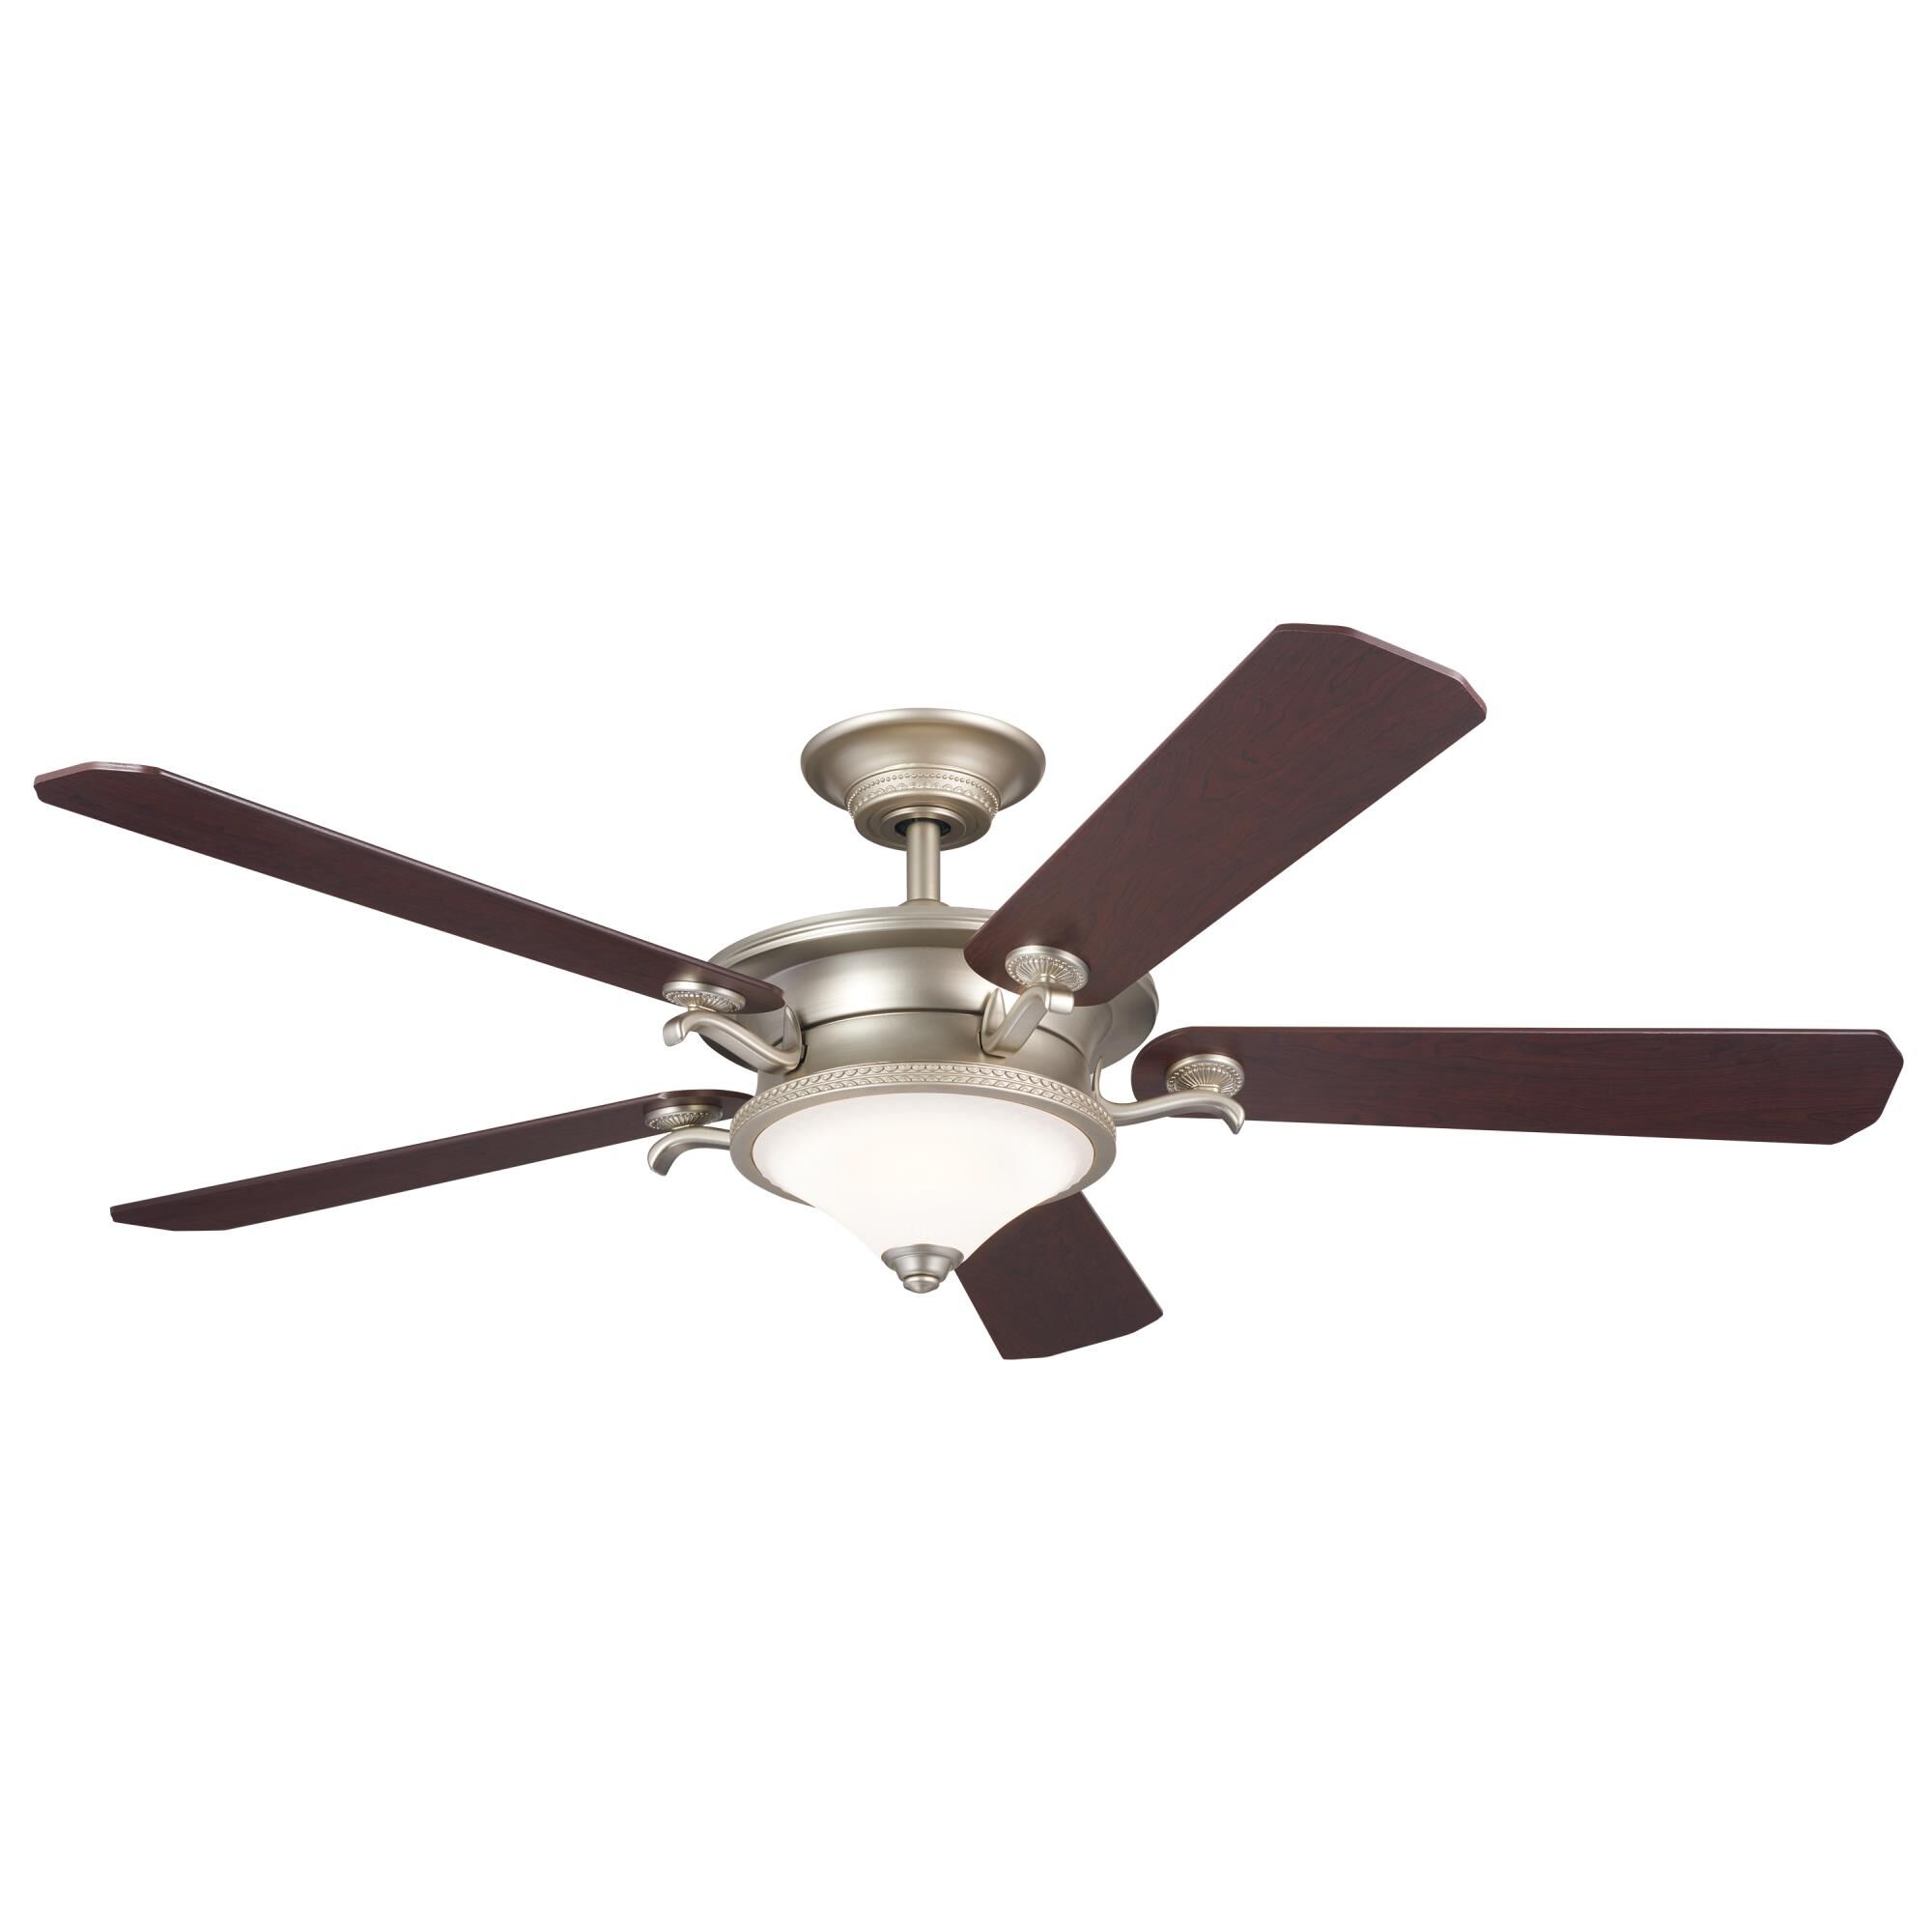 Photos - Fan Kichler Lighting Rise 60 Inch Ceiling  with Light Kit Rise - 300370NI  